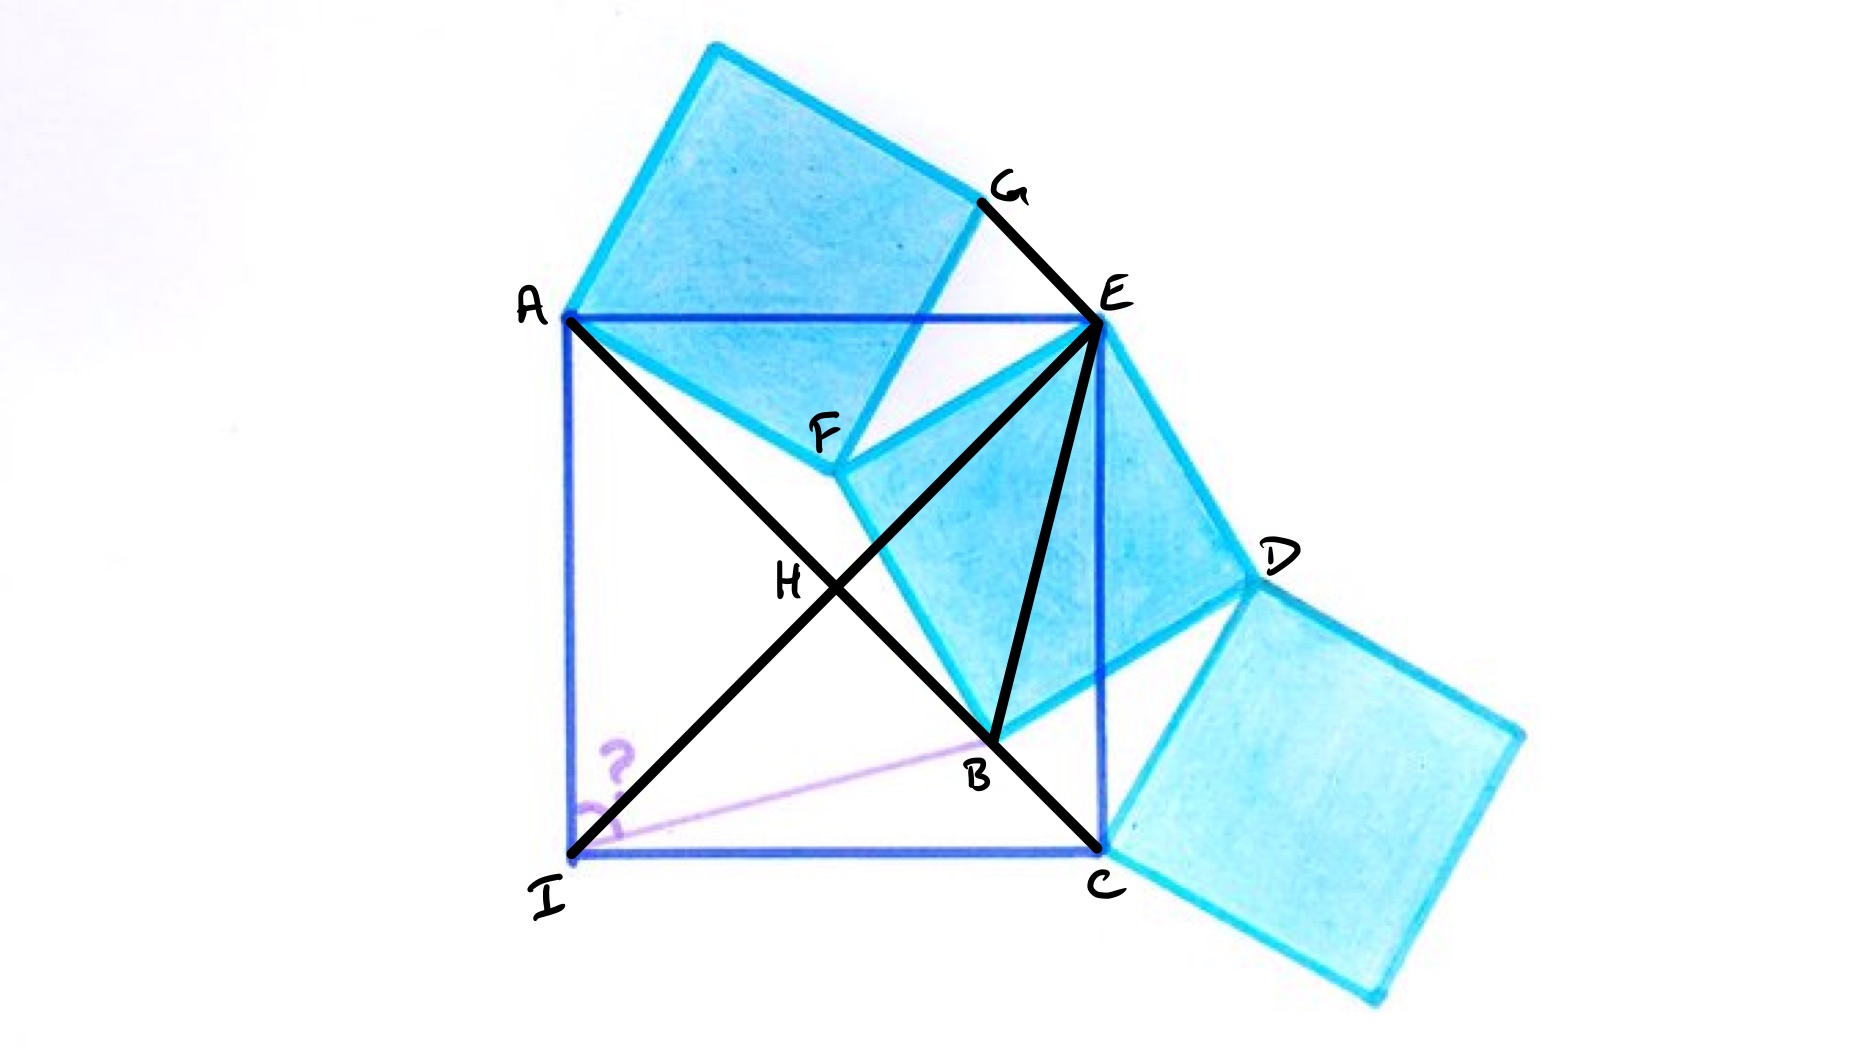 Three congruent squares overlapping a square labelled